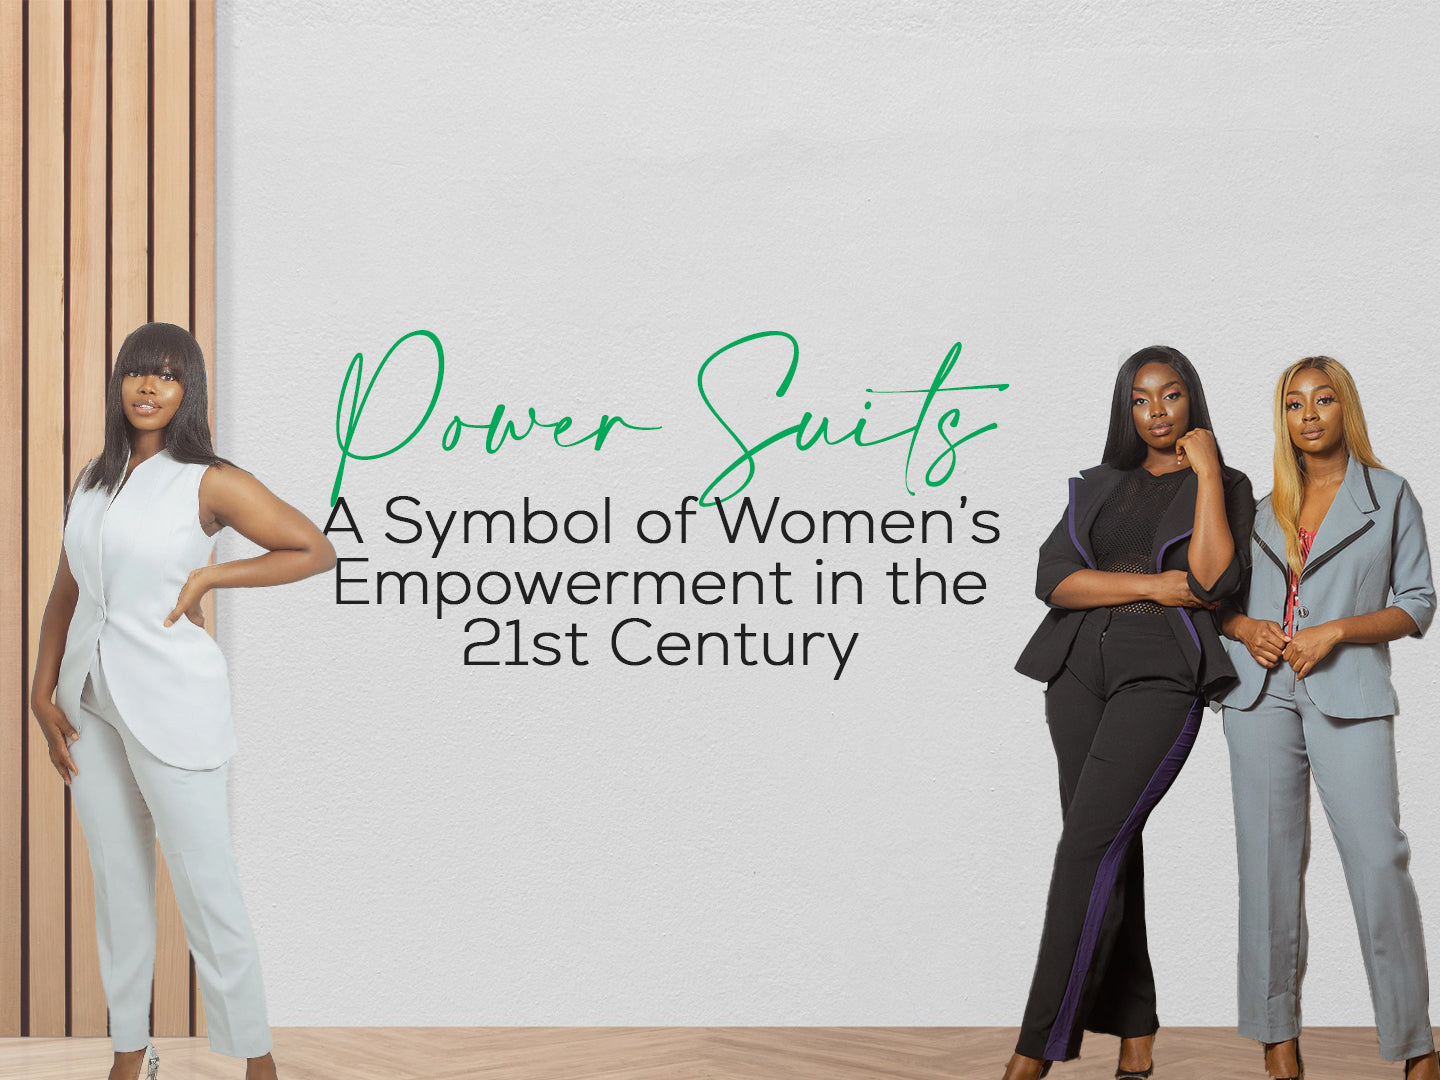 Power Suit: A Symbol of Women’s Empowerment in the 21st Century